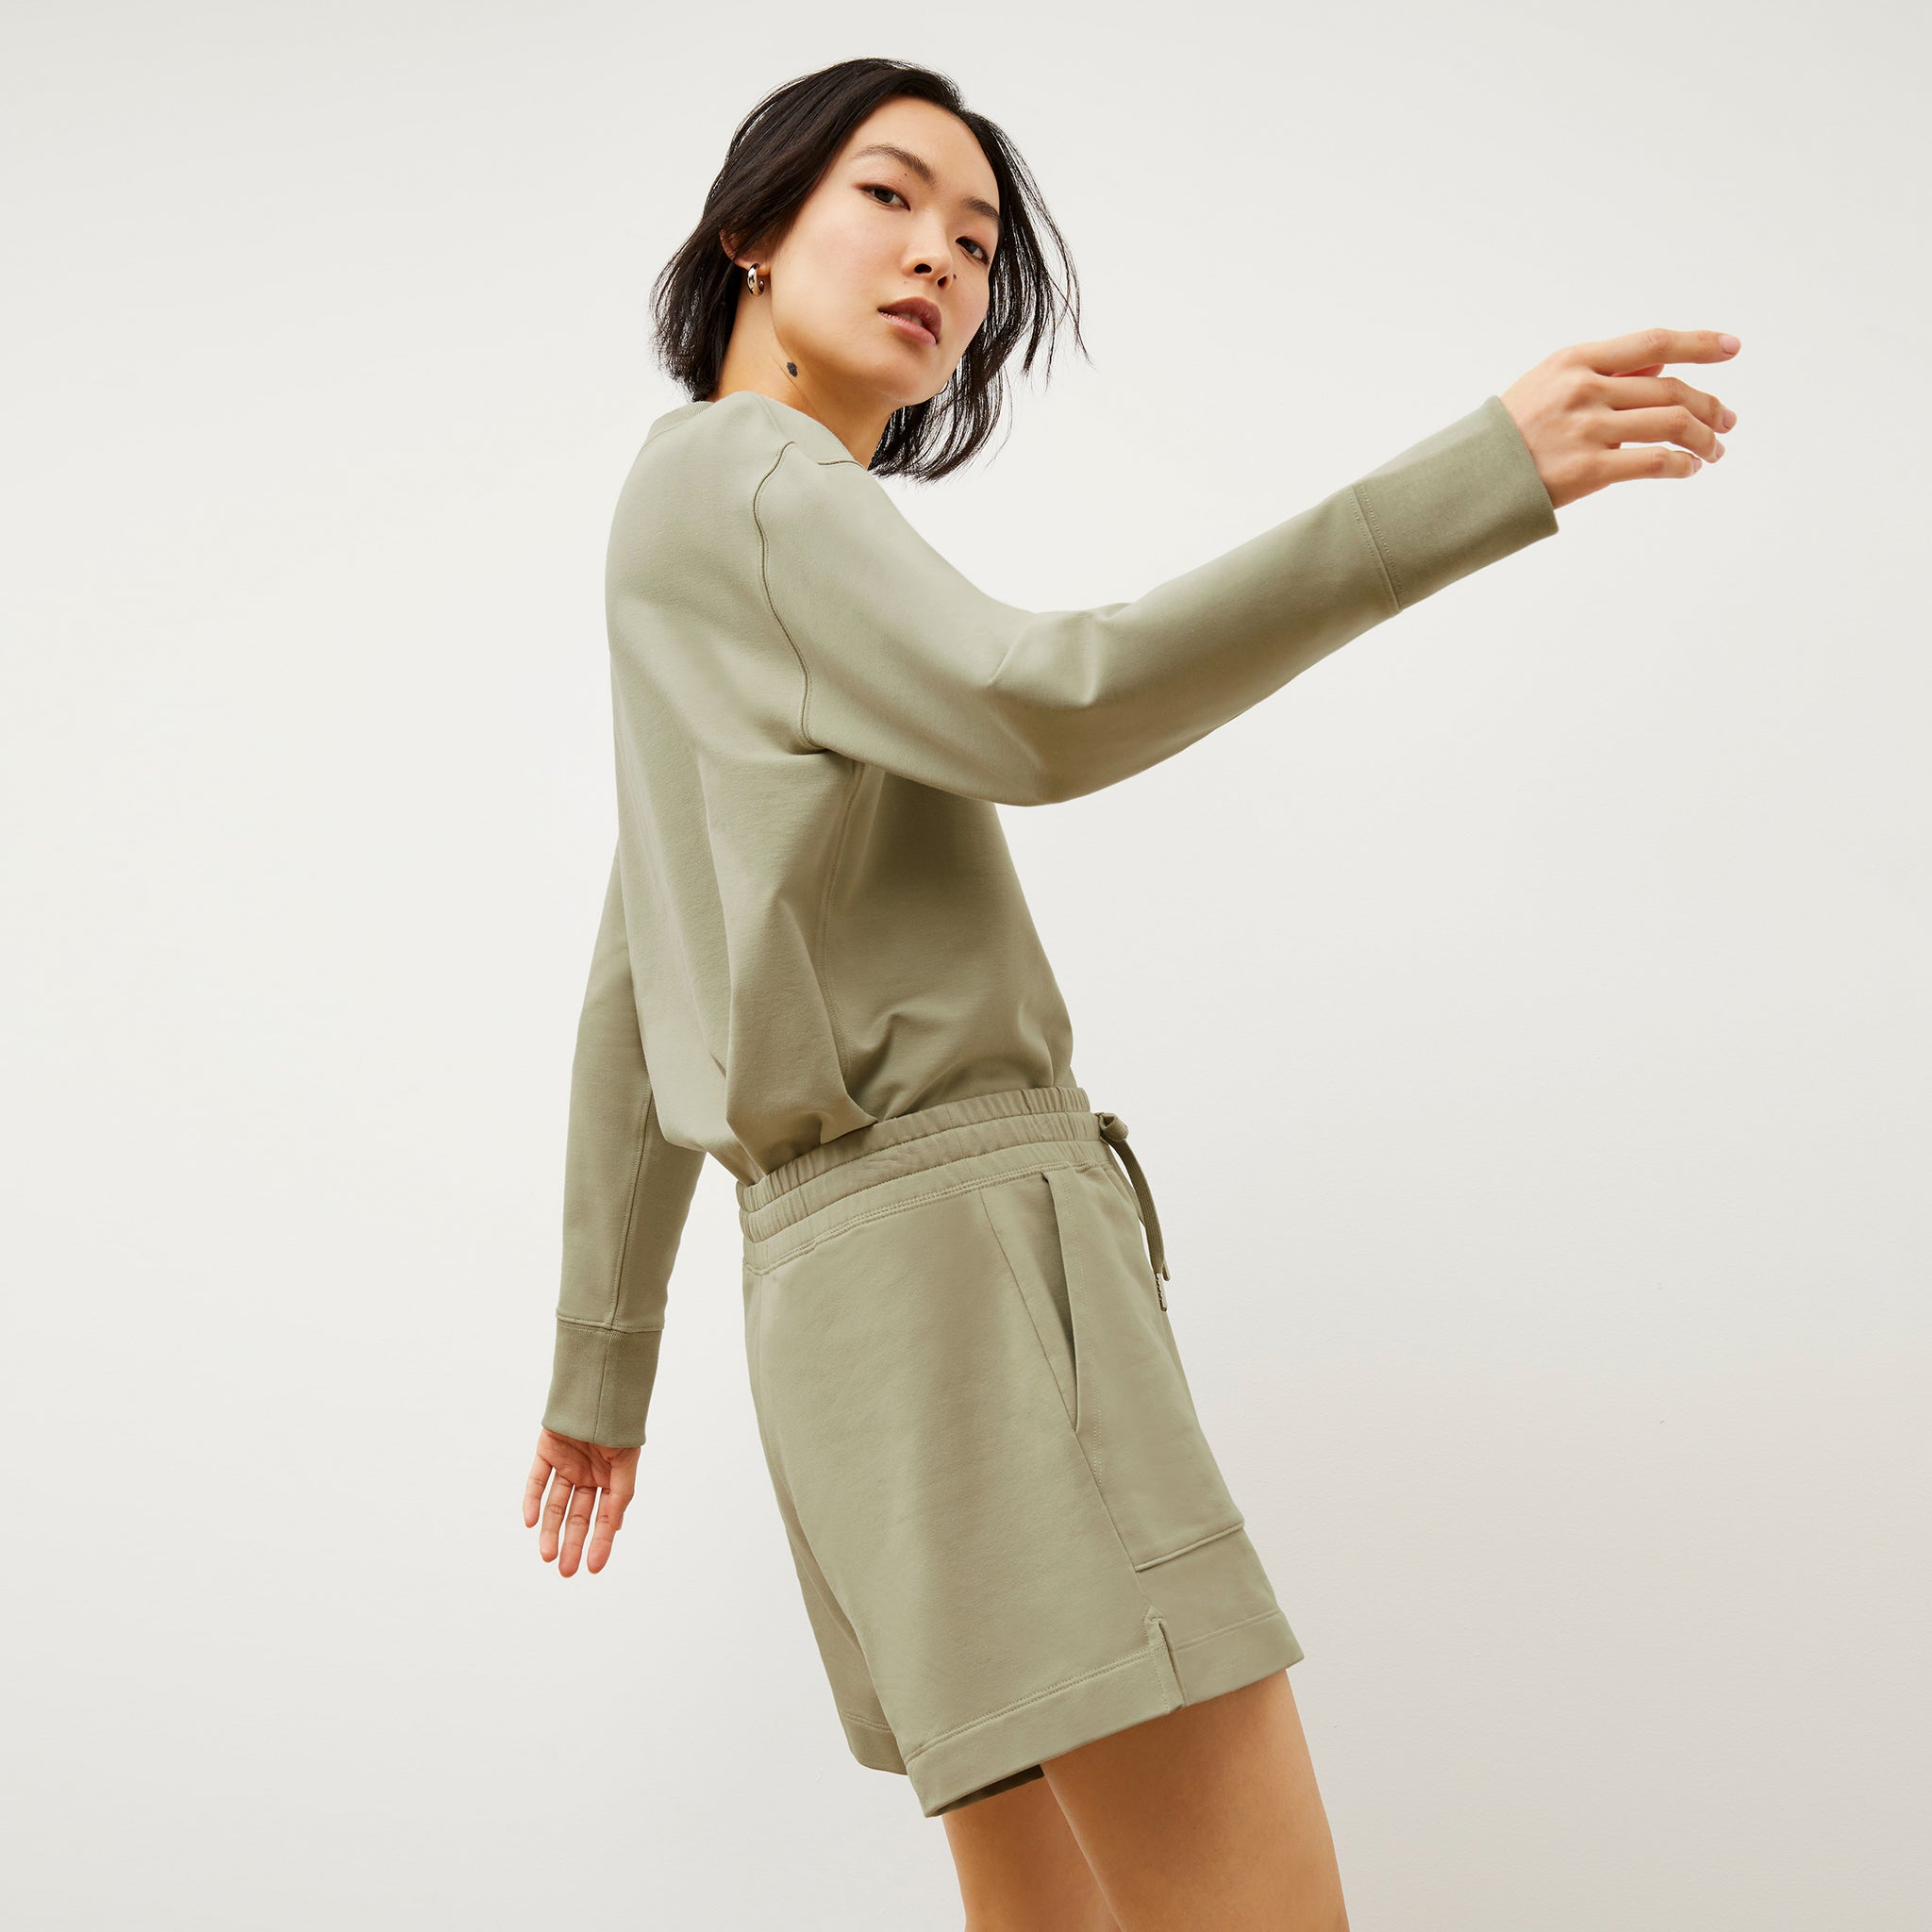 Side image of a woman wearing the Ellie Pullover - Light French Terry in Laurel Green